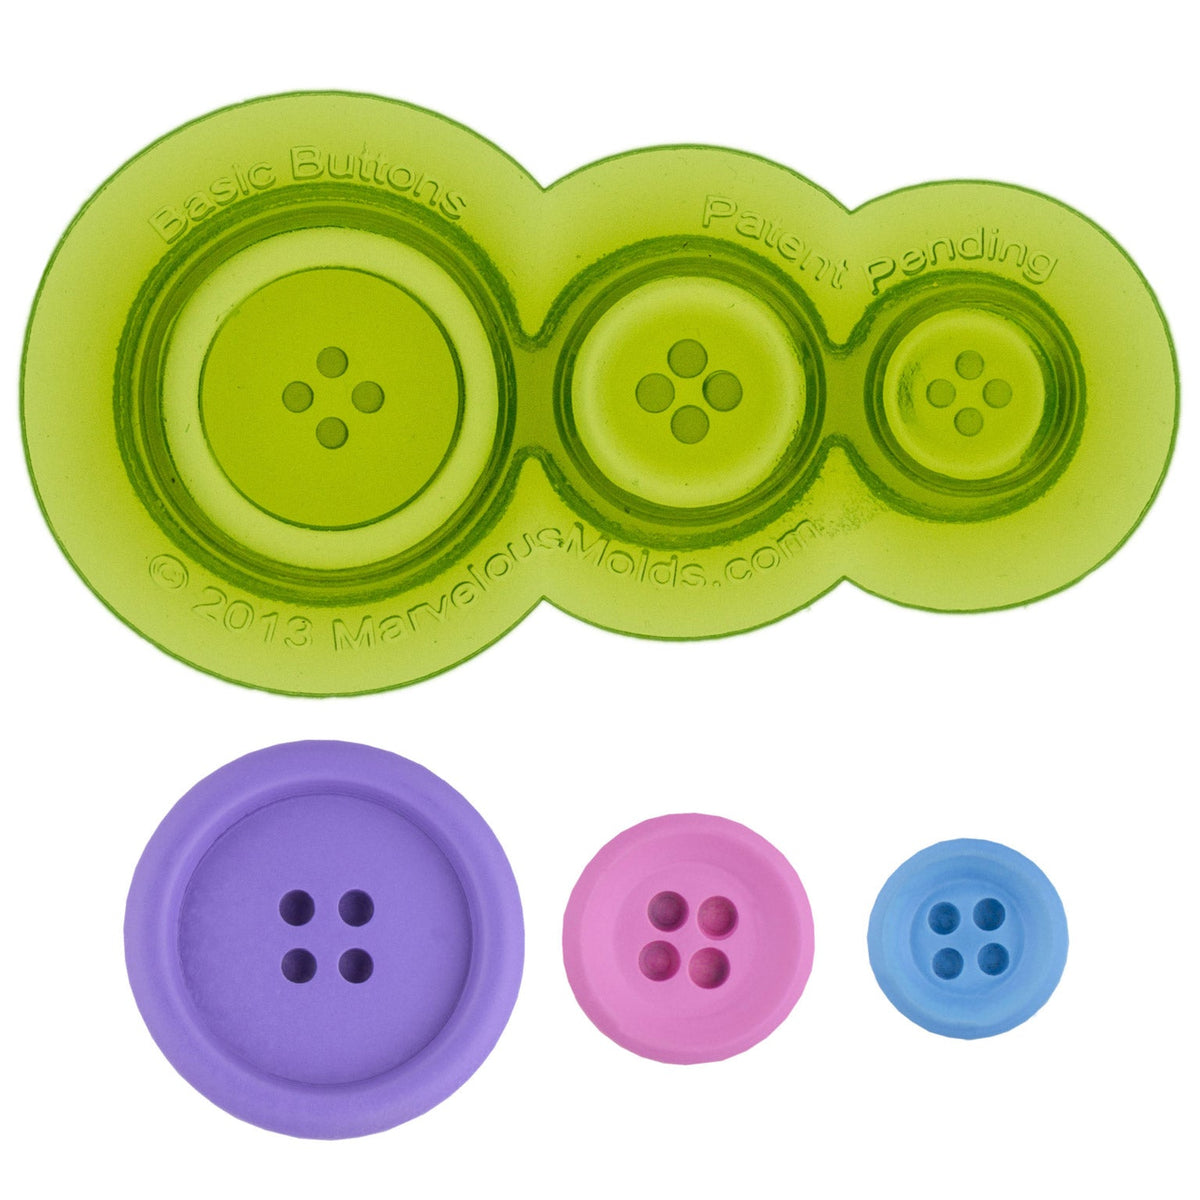 Basic Buttons Food Safe Silicone Mold for Fondant Cake Decorating by Marvelous Molds